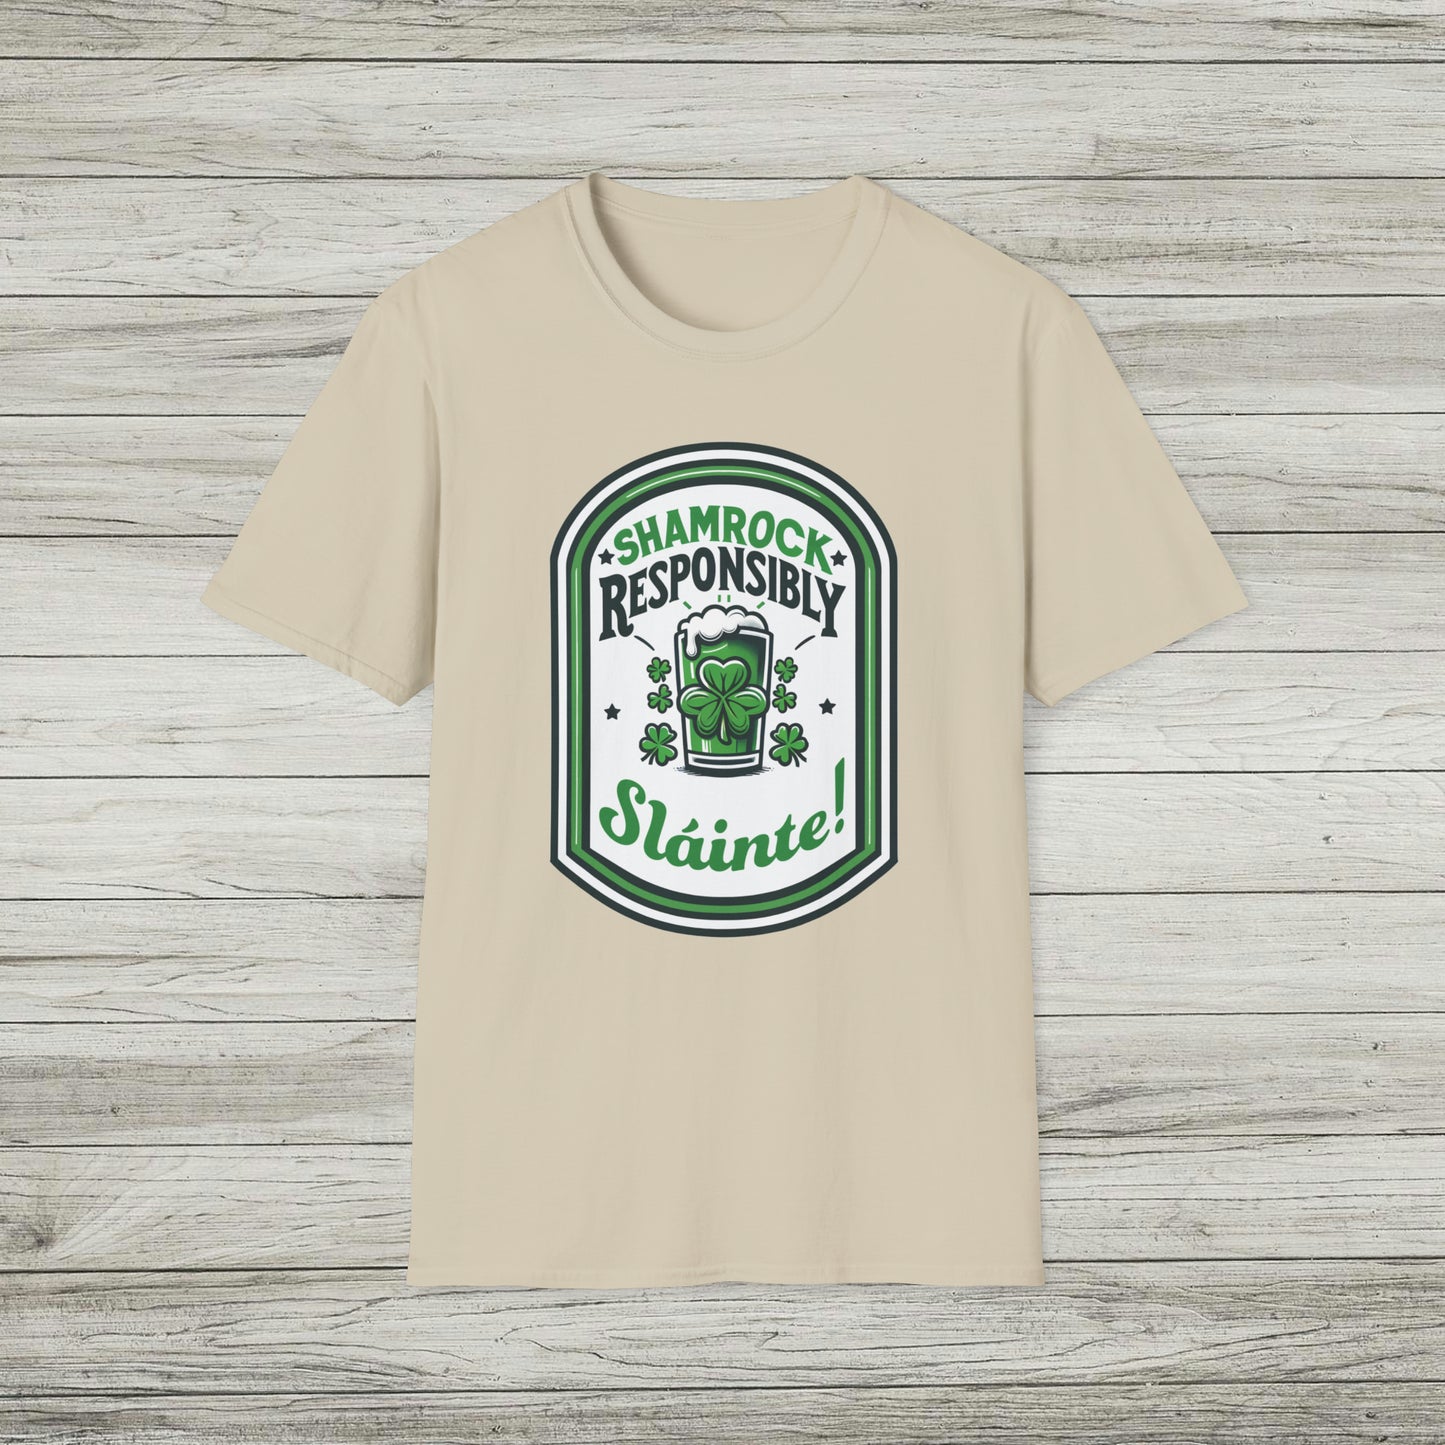 Shamrock Responsibly Slainte Softstyle T-Shirt, St. Patrick's Day Tee, Funny Lucky Beer Drinking TShirt